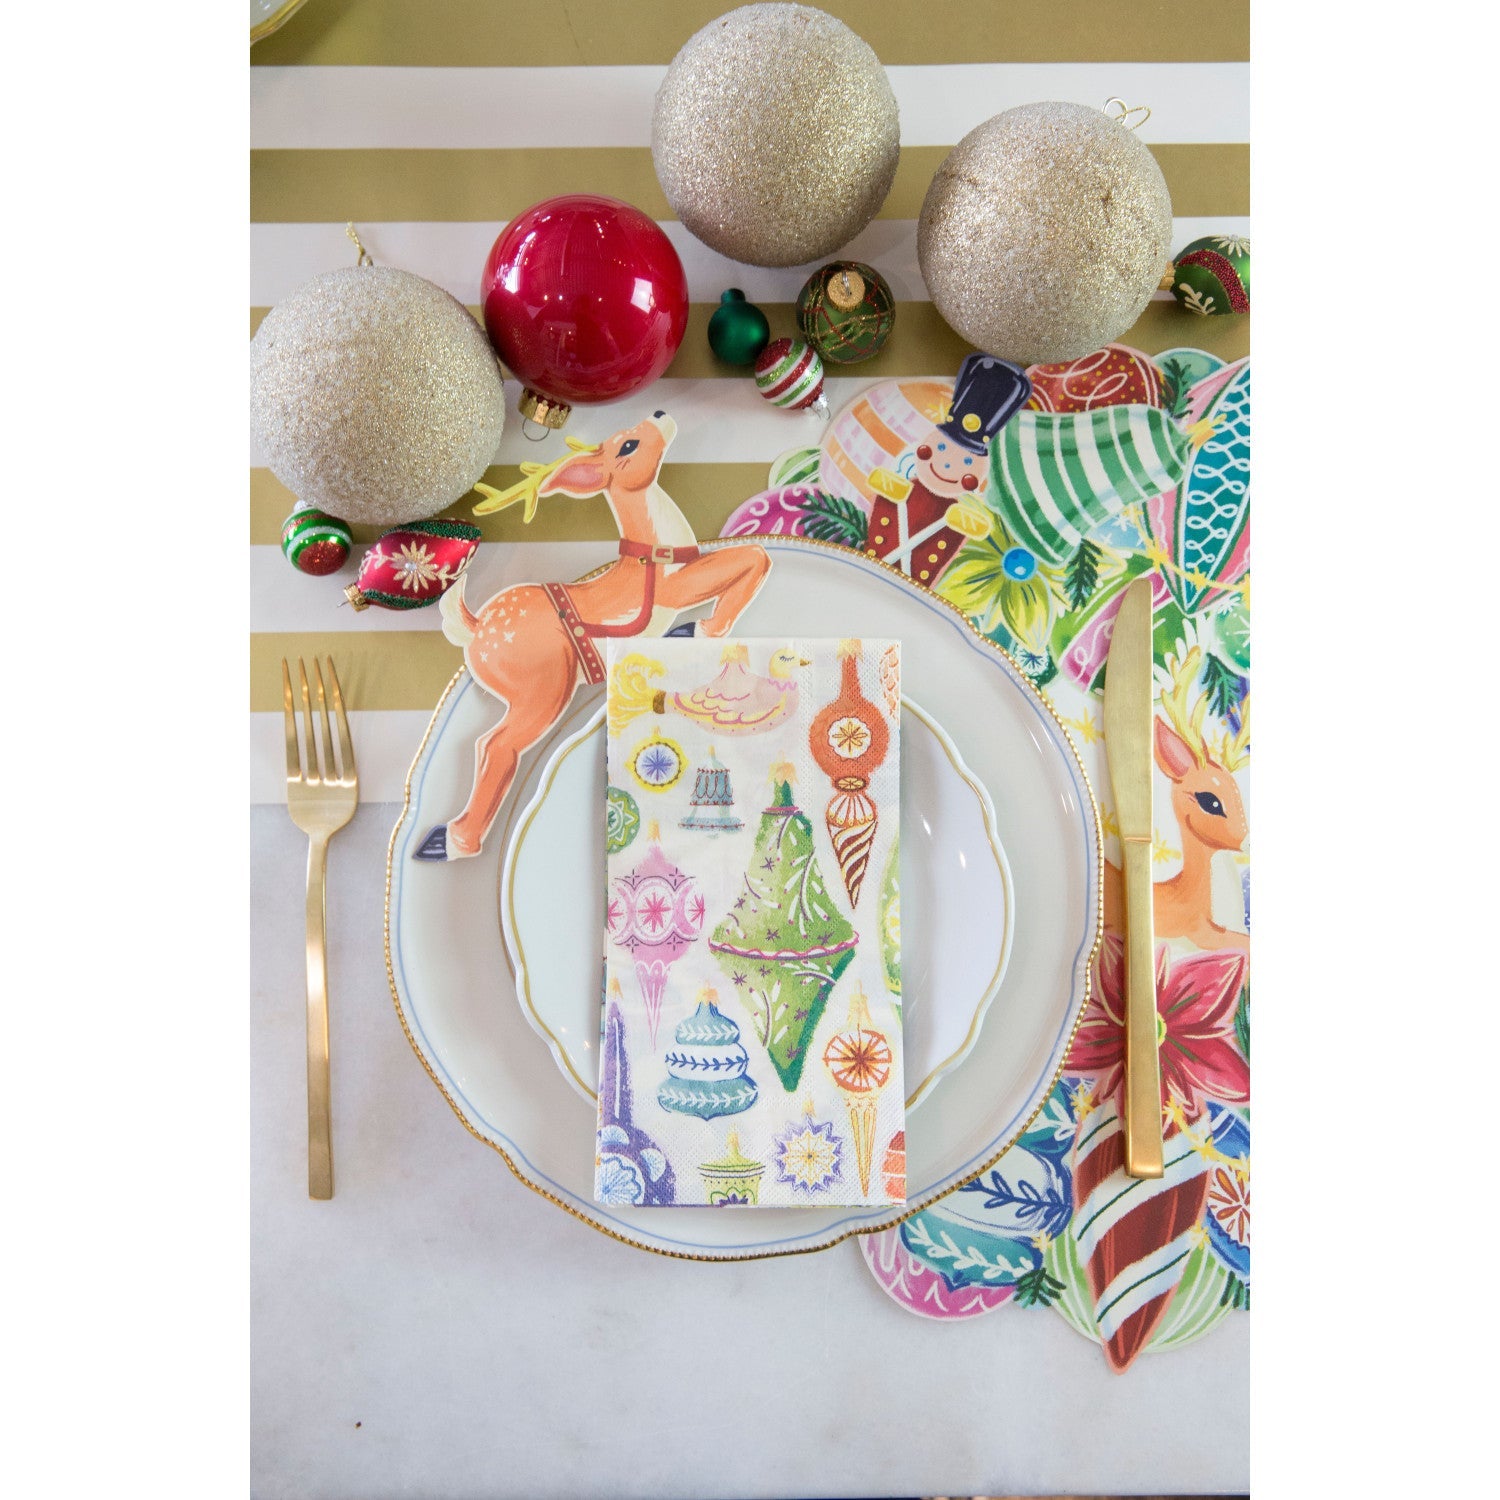 A festive Christmas place setting featuring an Ornament Guest napkin centered on the plate.